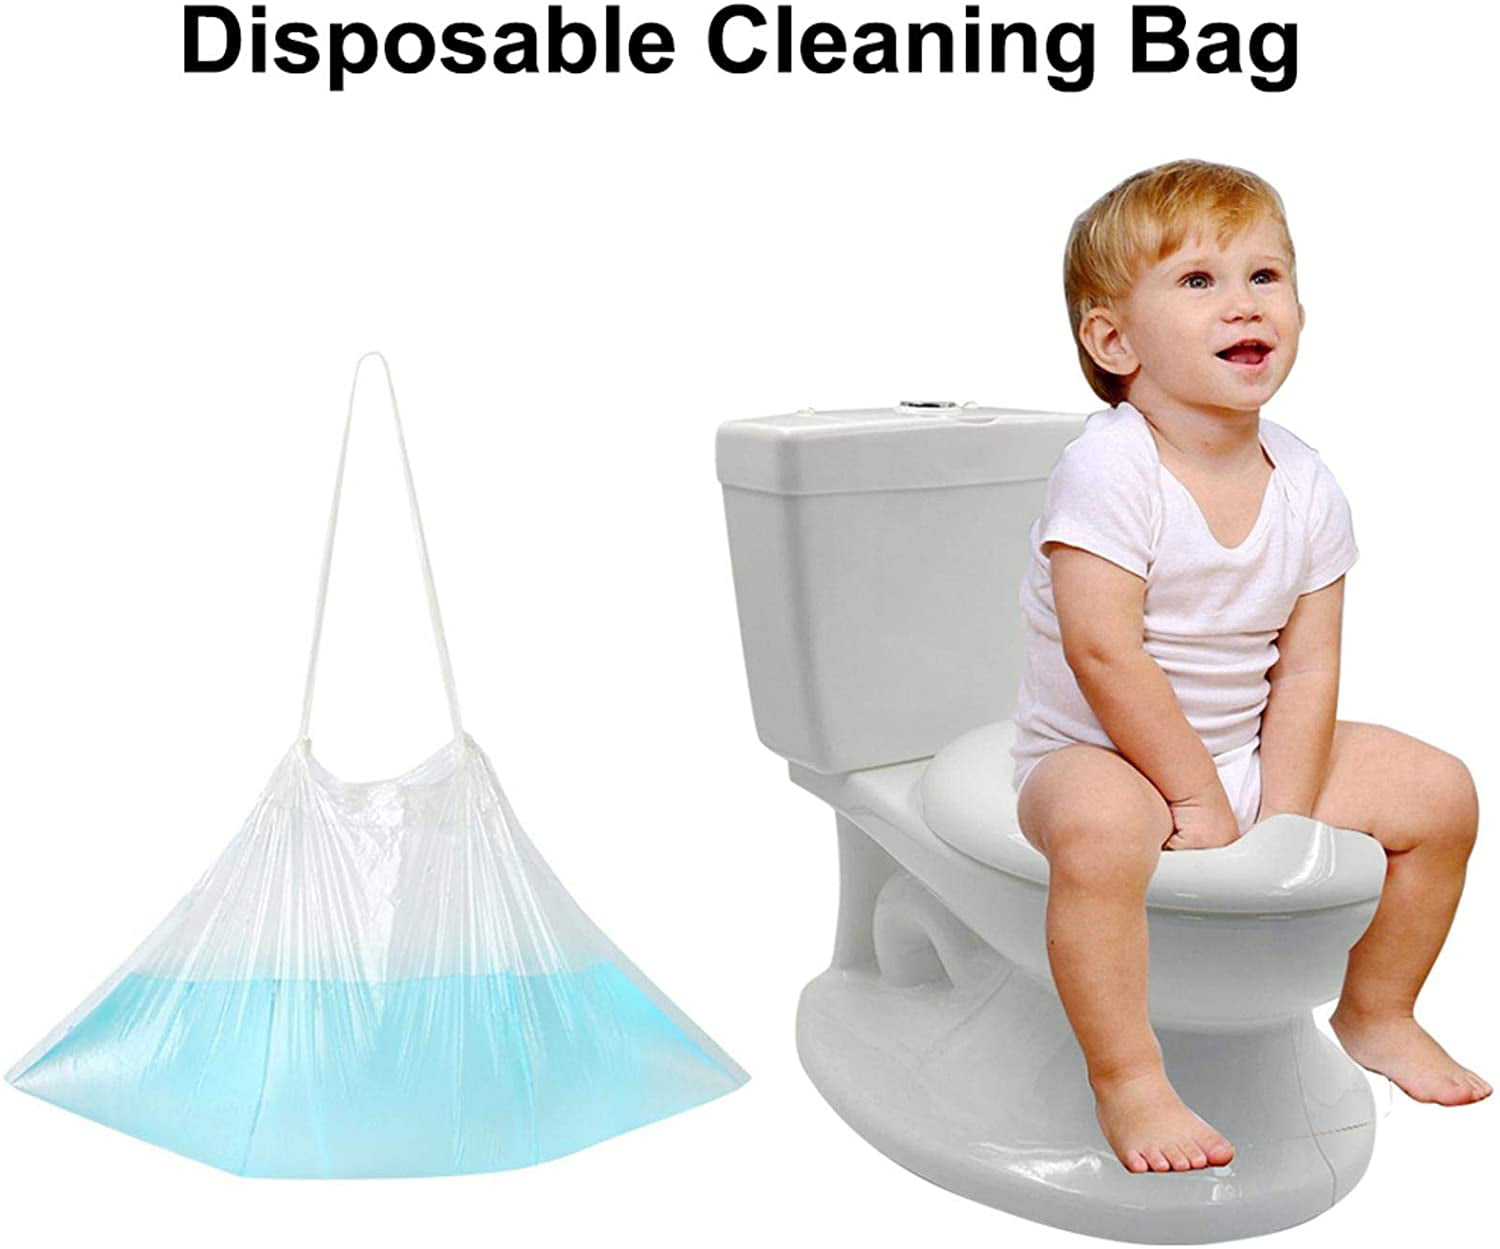 100 Pcs Portable Disposable Potty Bags with Drawstring,Universal Training Toilet Seat Potty Bags Cleaning Bag for Kids Toddlers Phoetya Travel Potty Liners